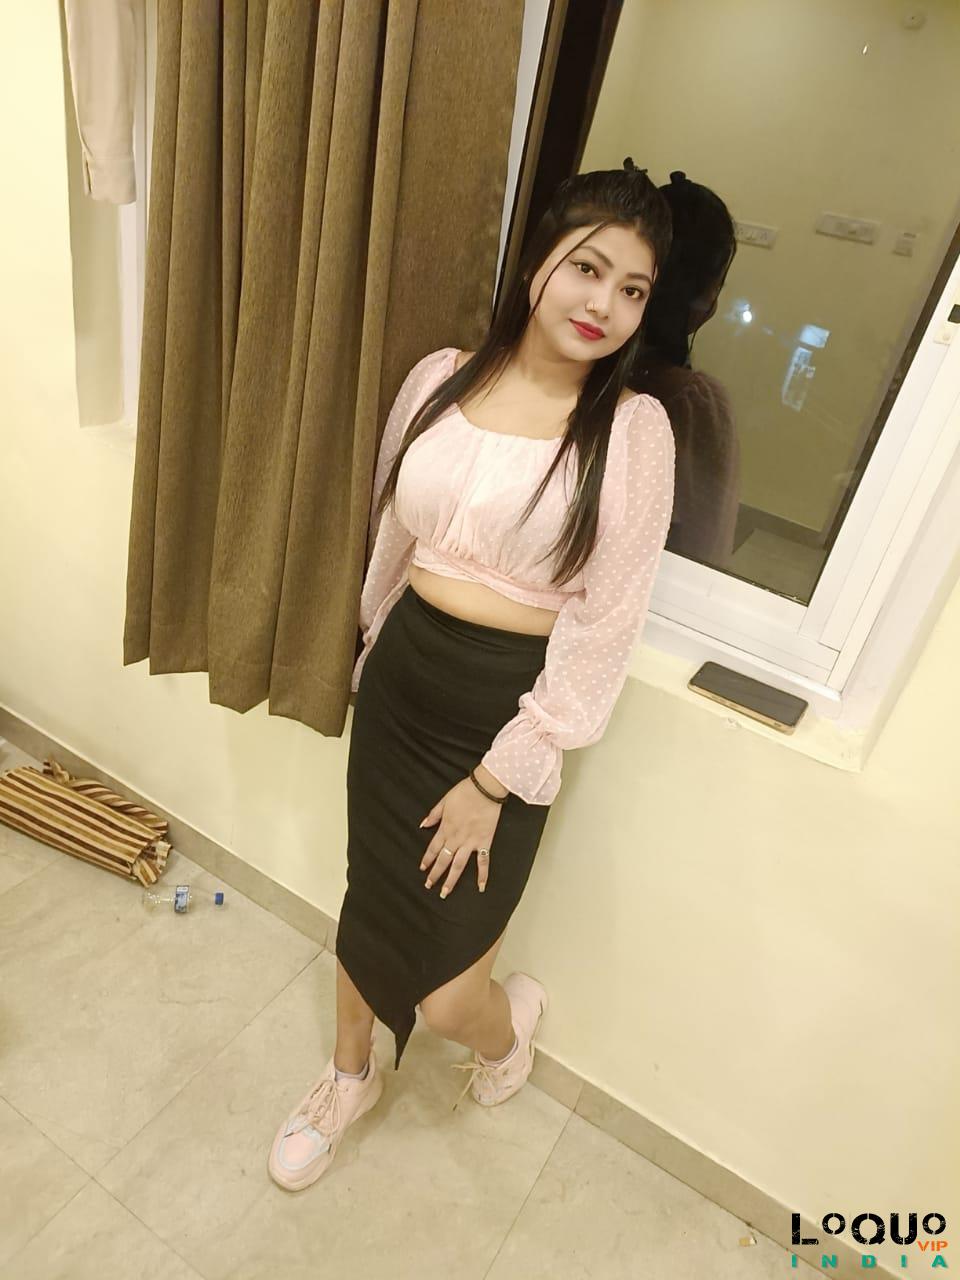 Call Girls Gujarat: ↘️ CLICK HERE ↙️95086//28989 GENUINE PERSON ♥️ ONLY FOR SEX INDEPEND